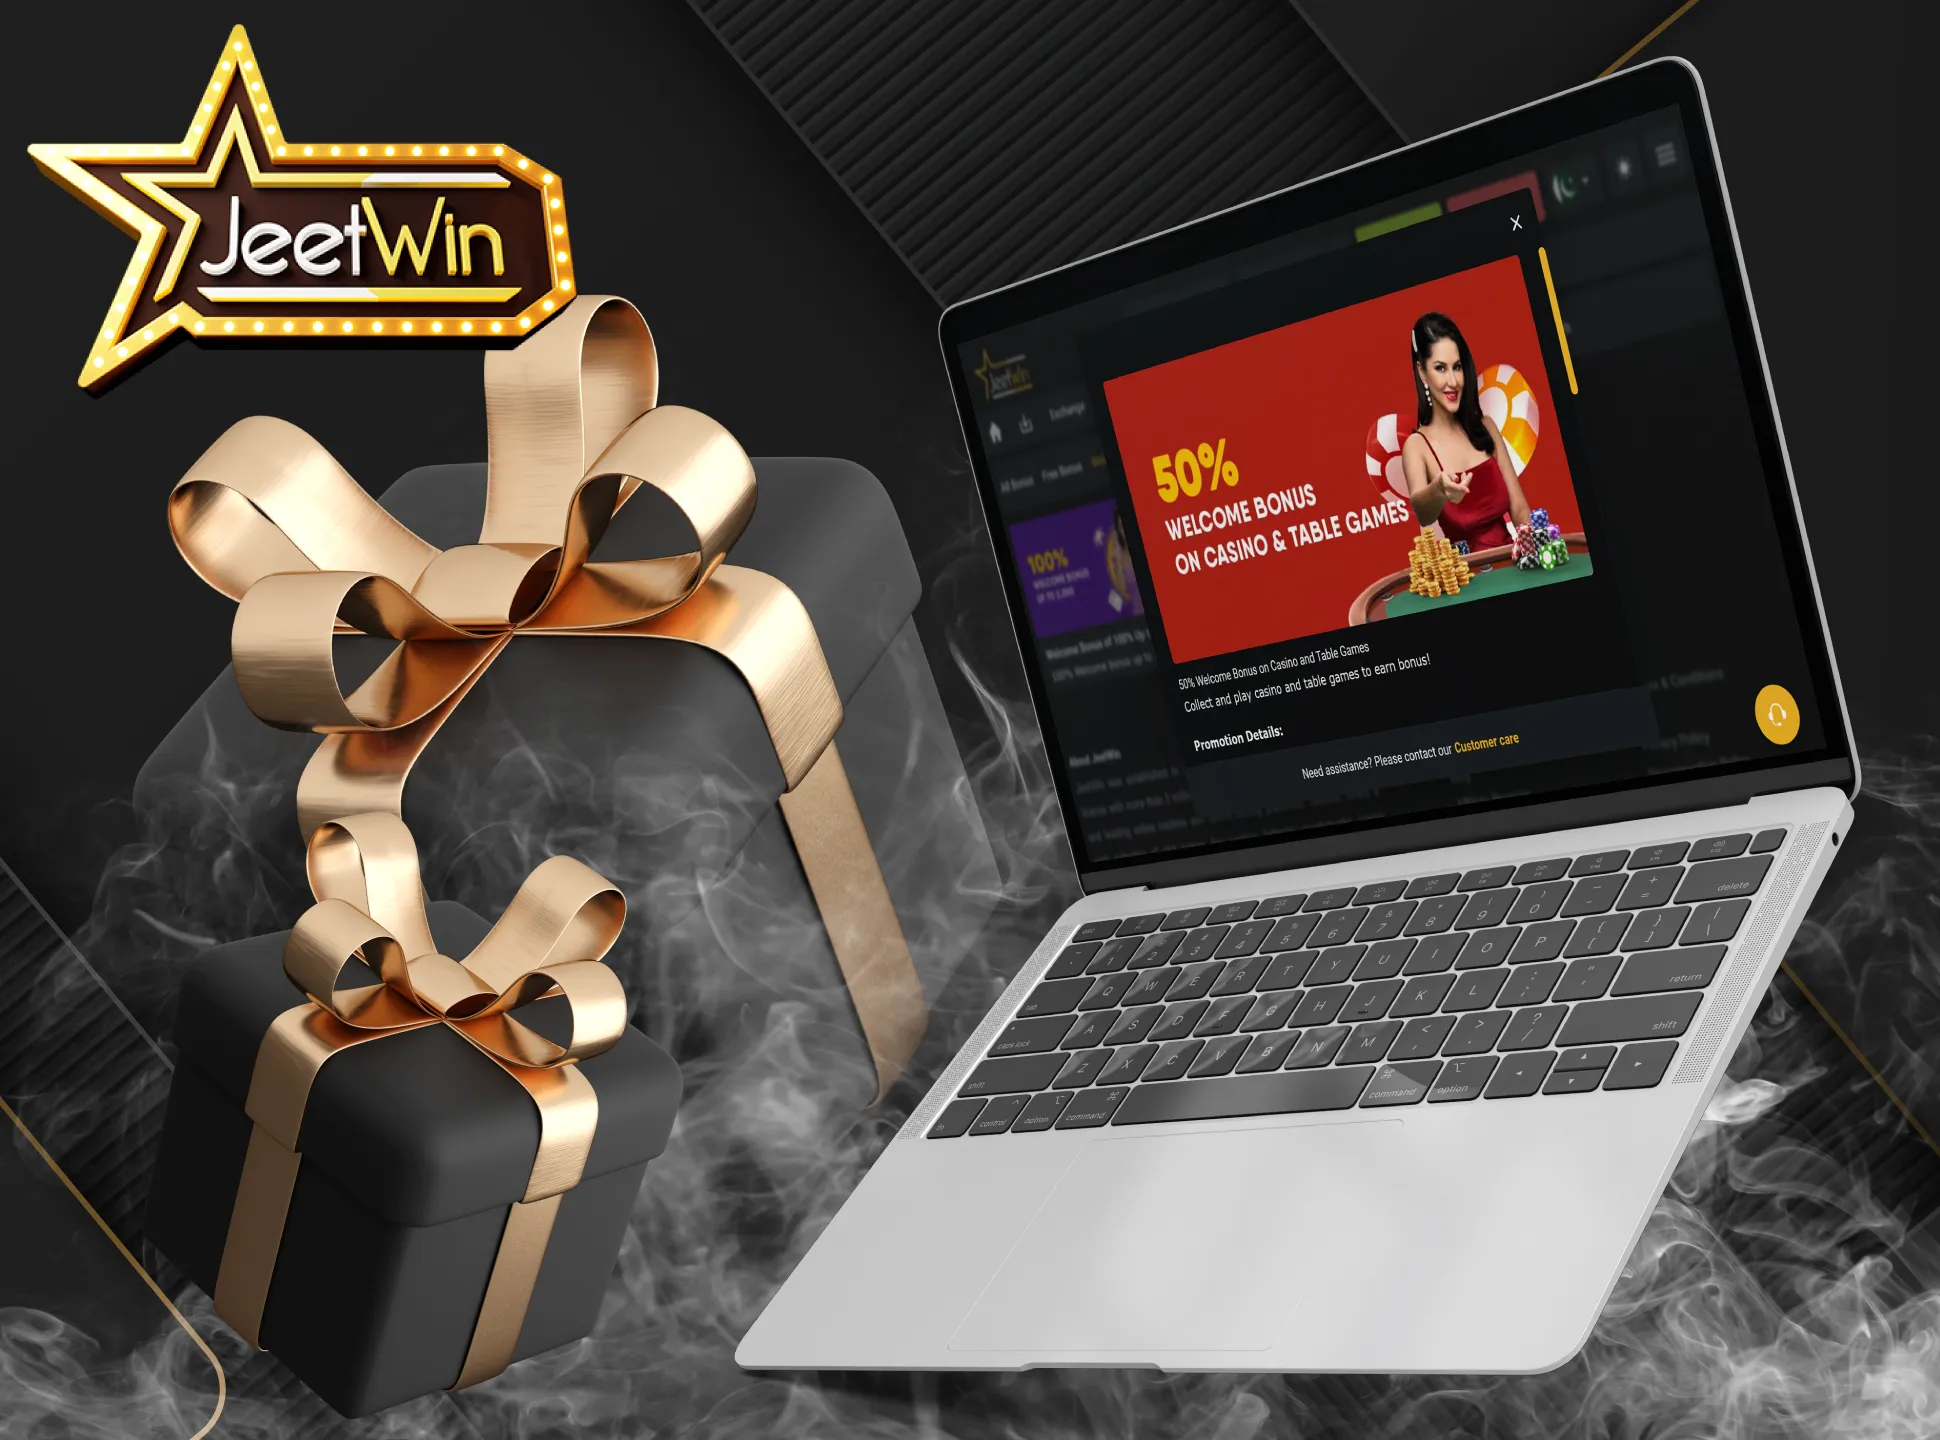 Get bonus as a new player on JeetWin website.